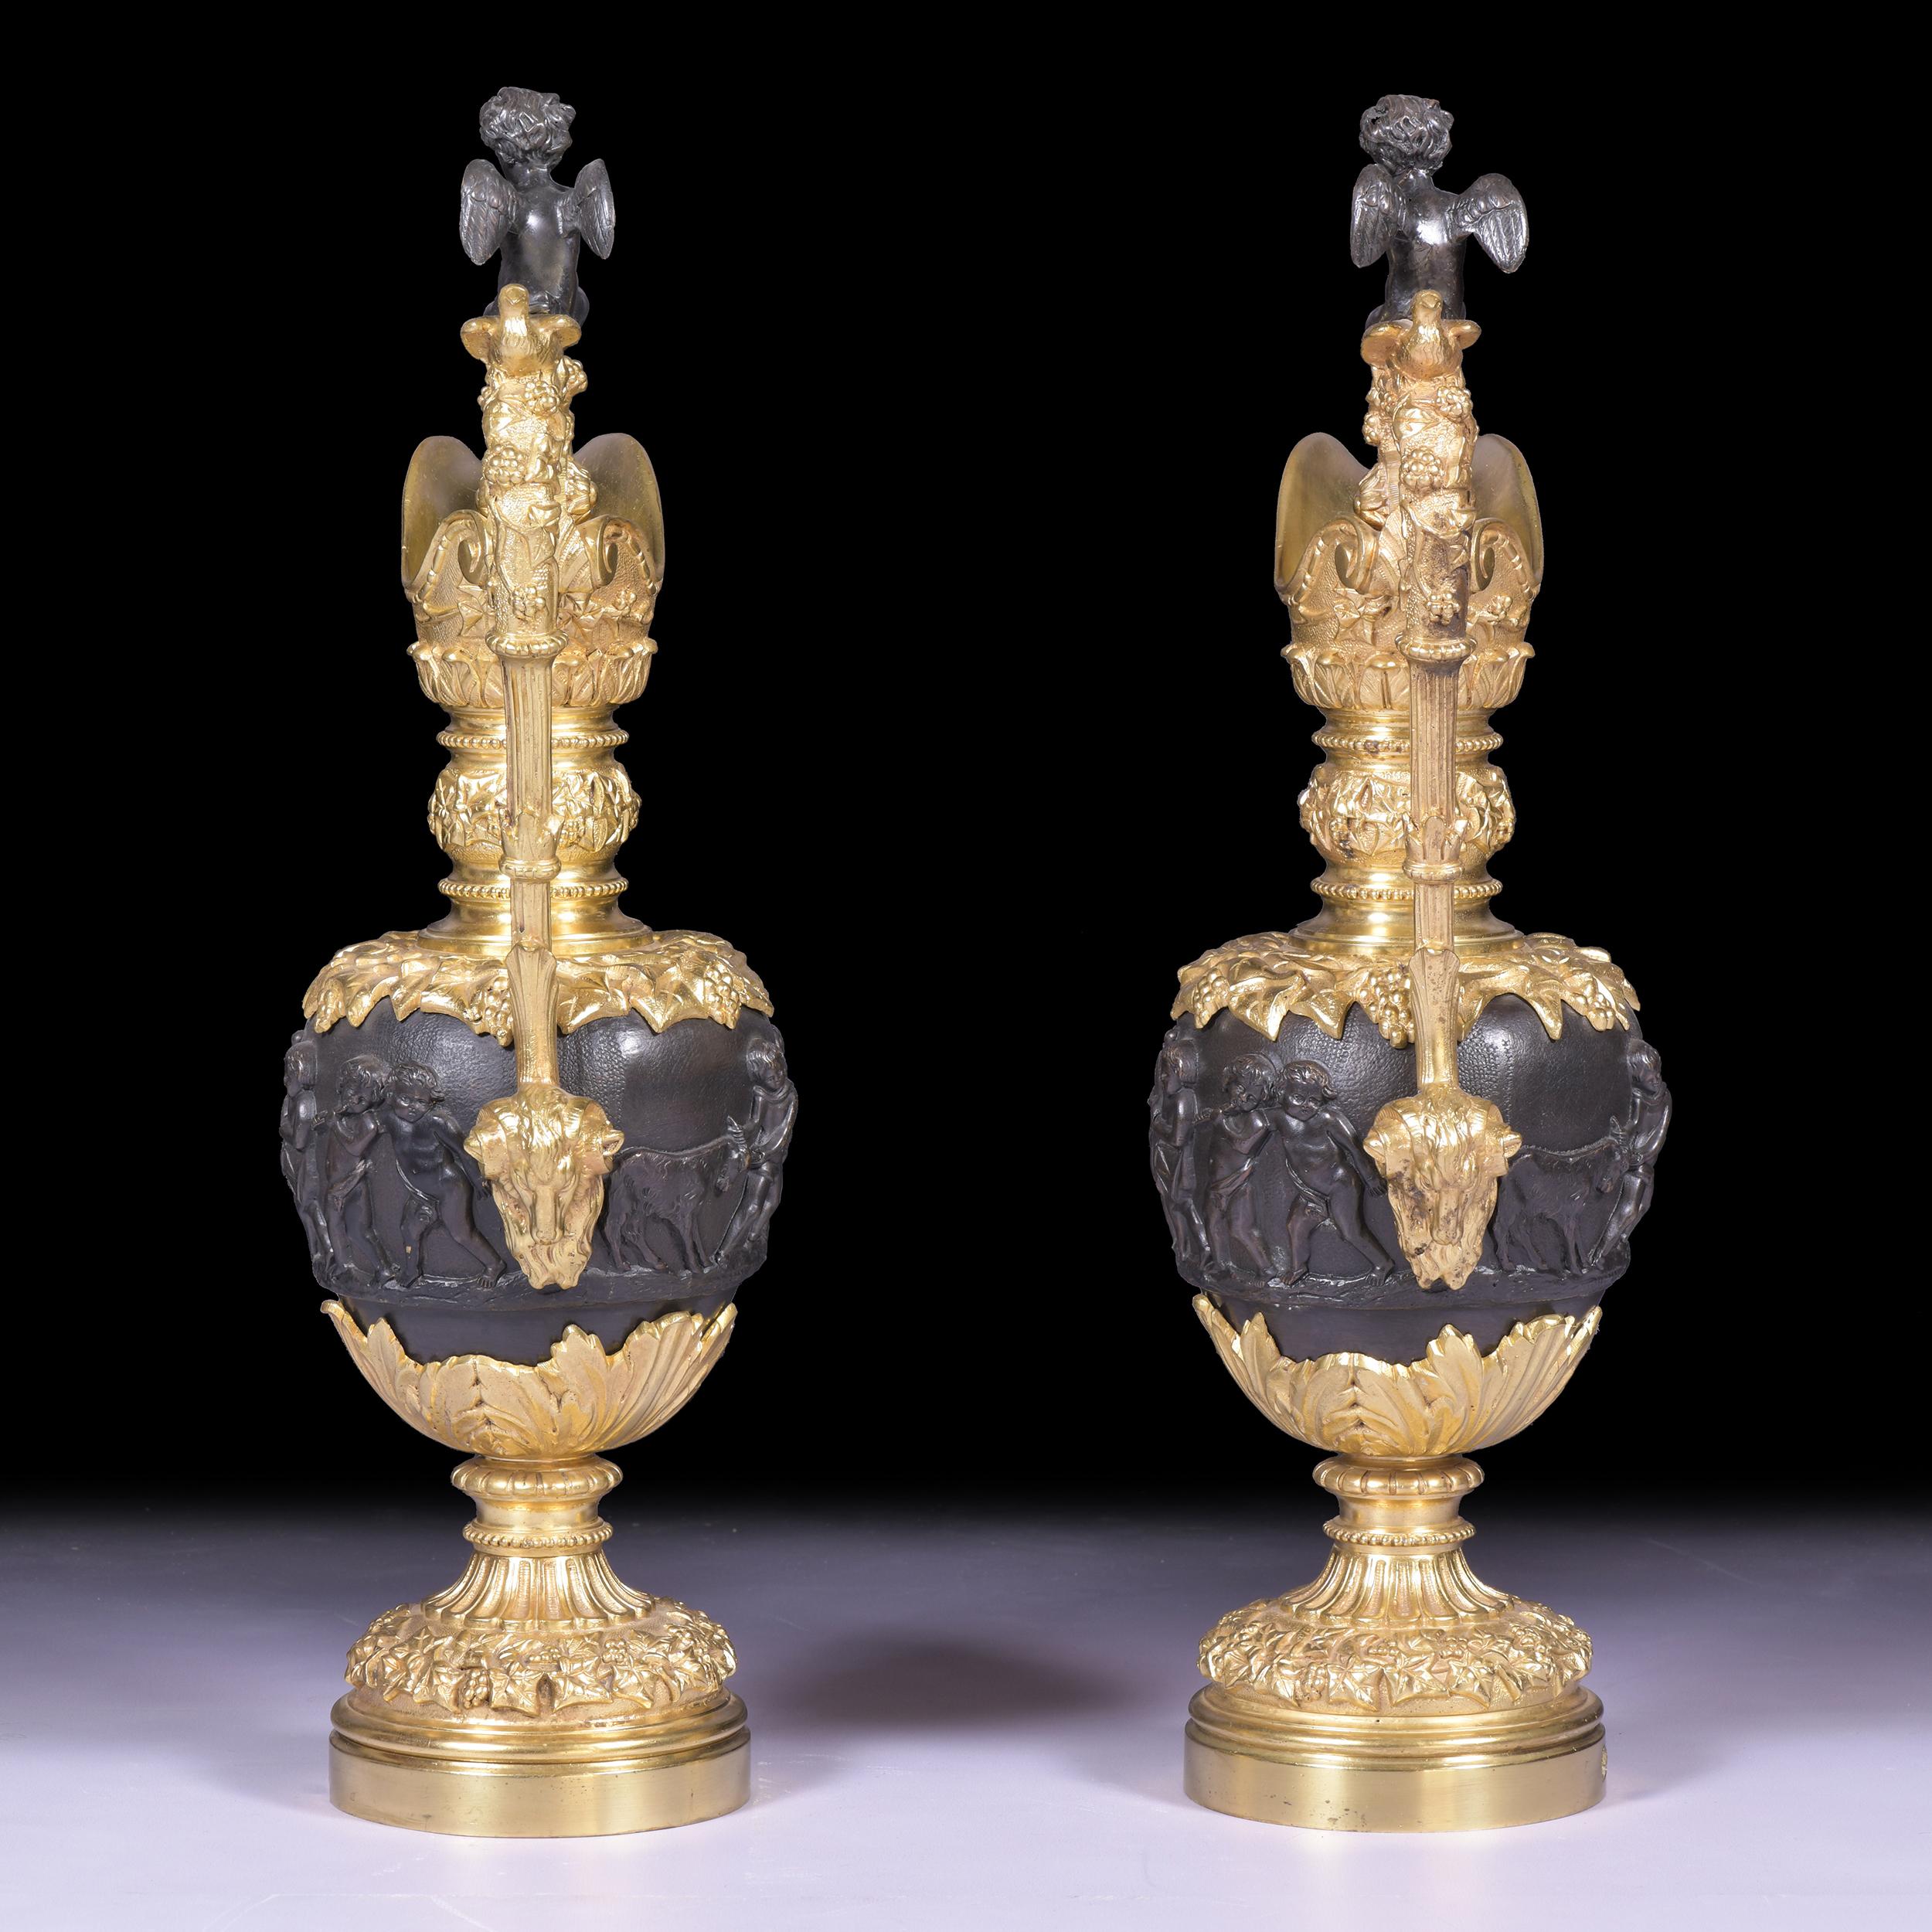 French Pair Of 19th Century Ormolu & Bronze Ewers In The Renaissance Style For Sale